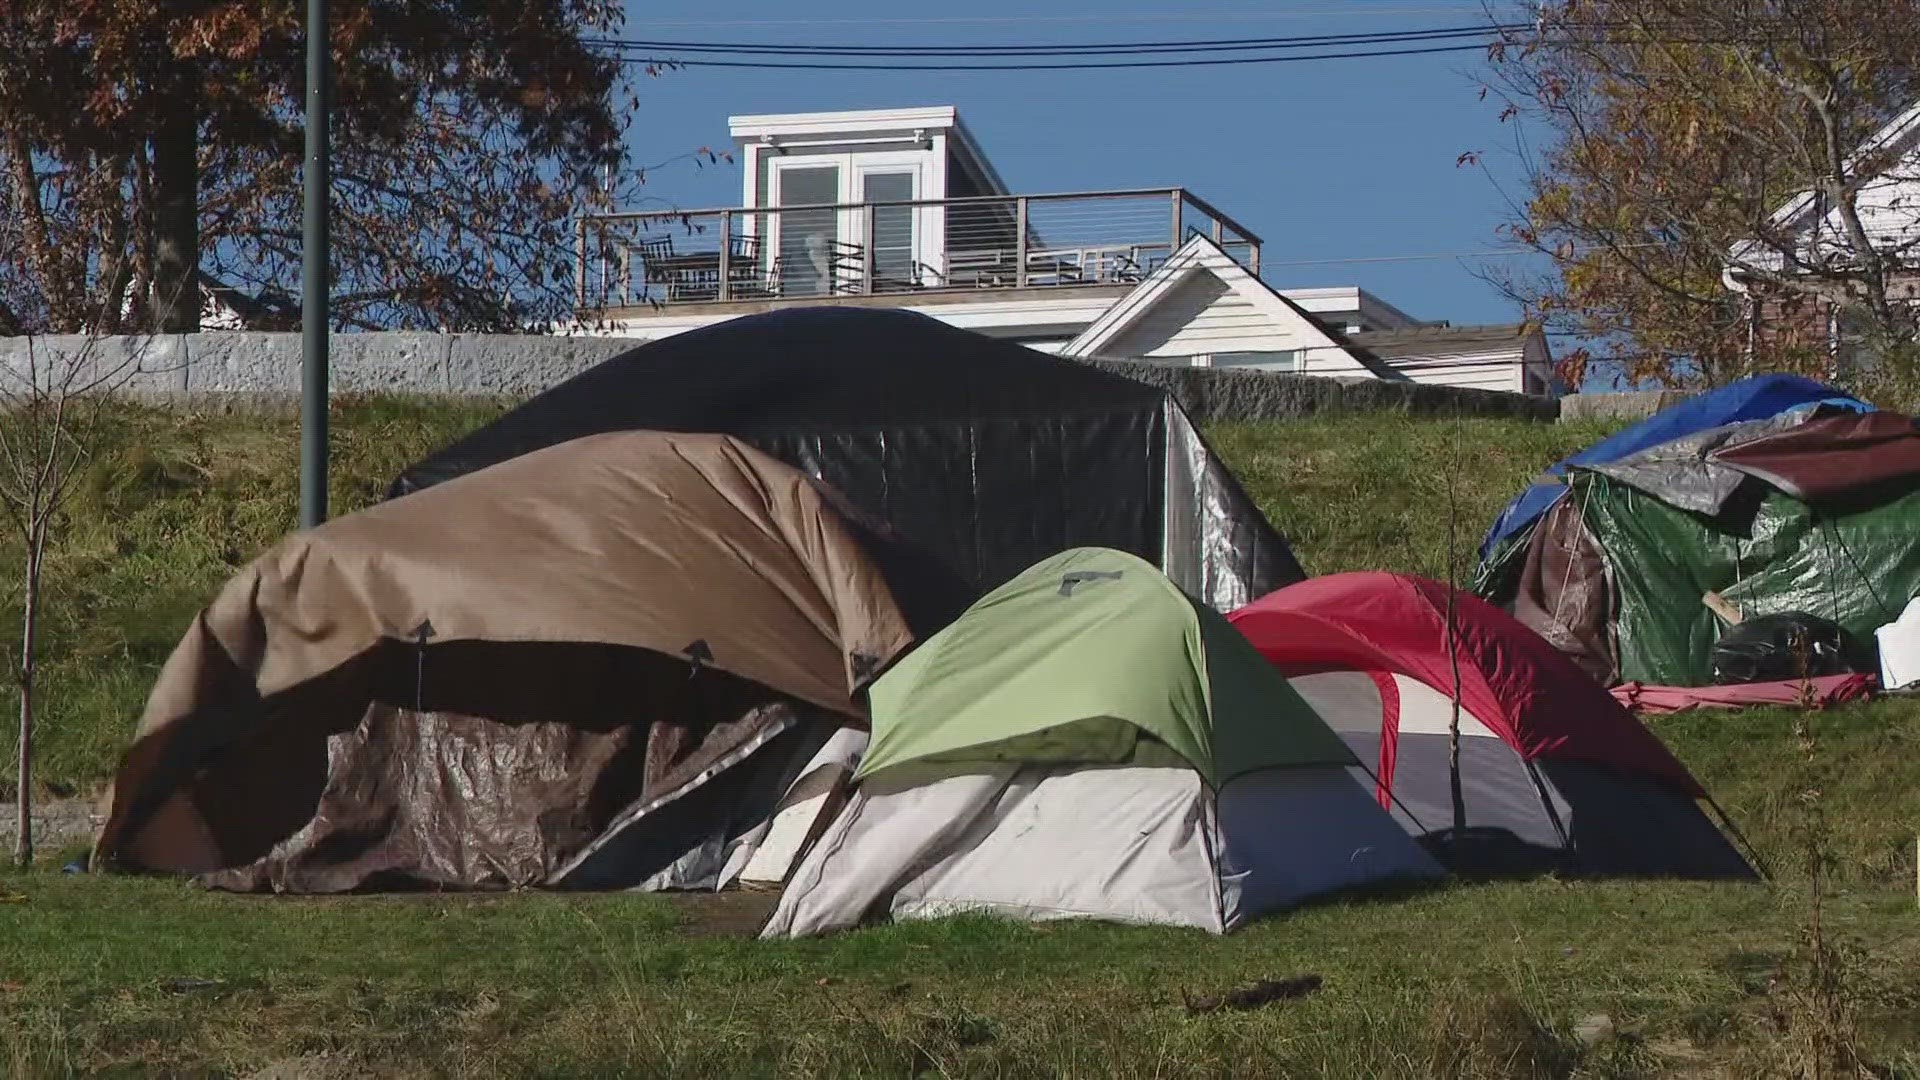 The Portland City Council is set to decide Monday whether to allow encampments through the winter or clear the tents near Harbor View Memorial Park.